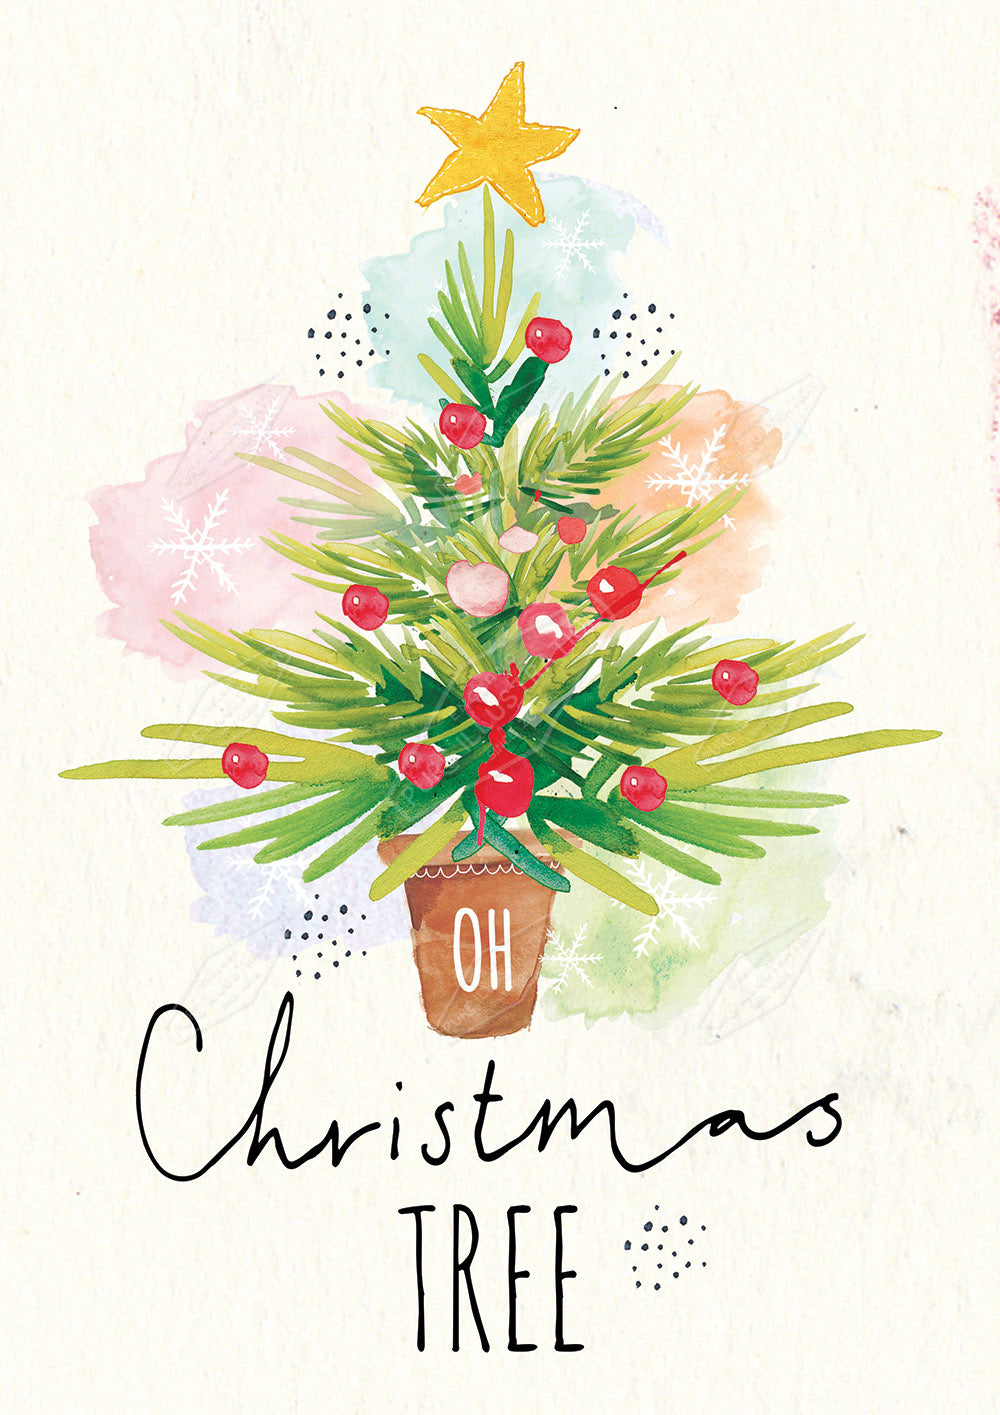 00027727EST- Emily Stalley is represented by Pure Art Licensing Agency - Christmas Greeting Card Design